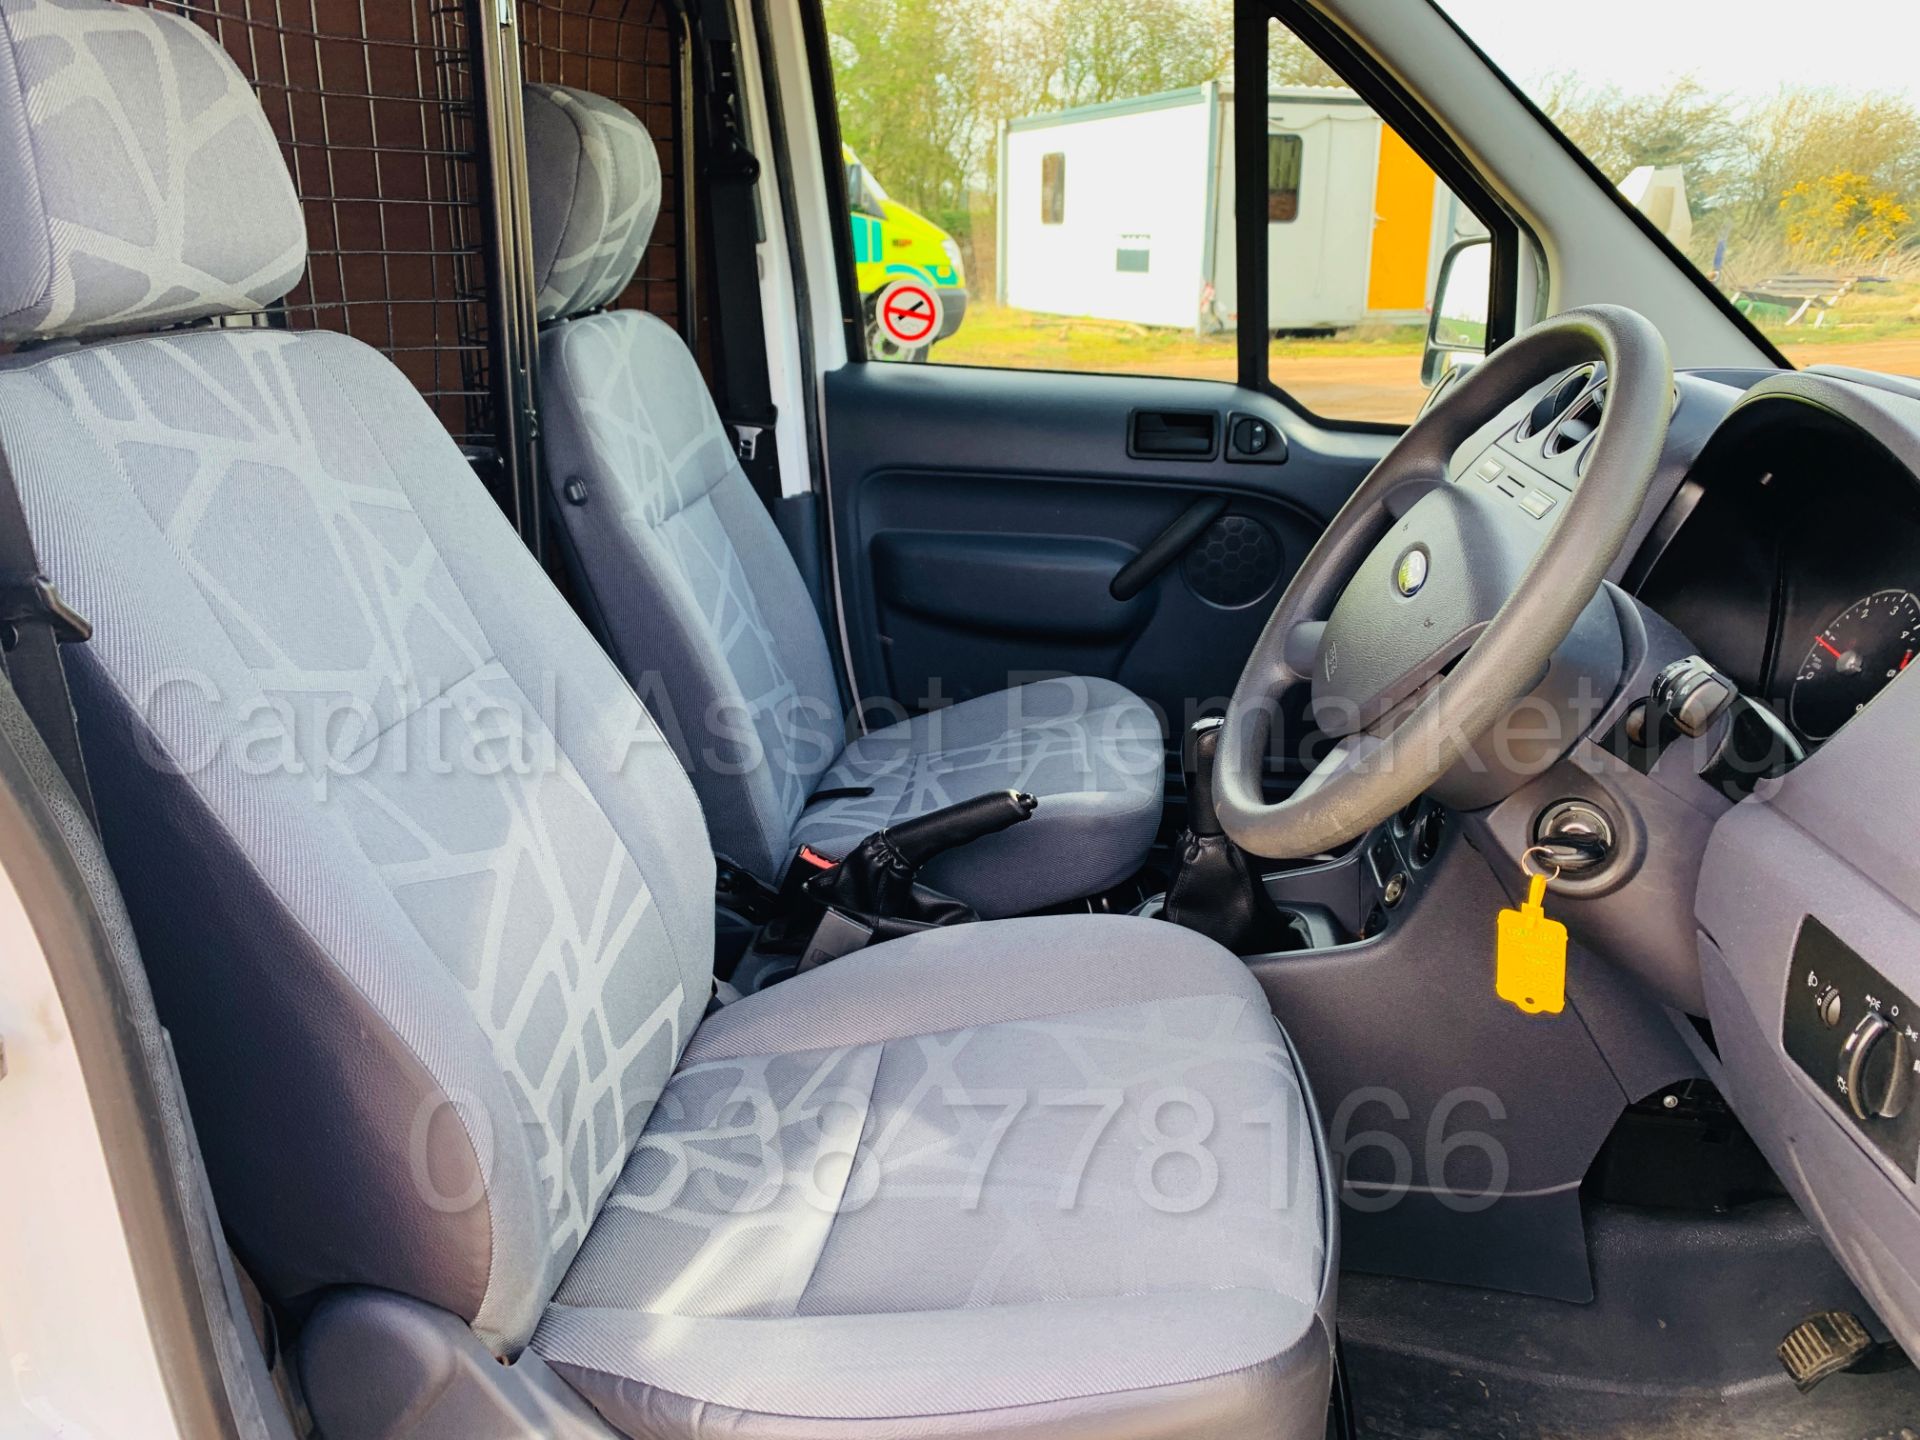 ON SALE FORD TRANSIT CONNECT T200 *LCV - PANEL VAN* (2013 MODEL) '1.8 TDCI -*LOW MILES - Image 21 of 30